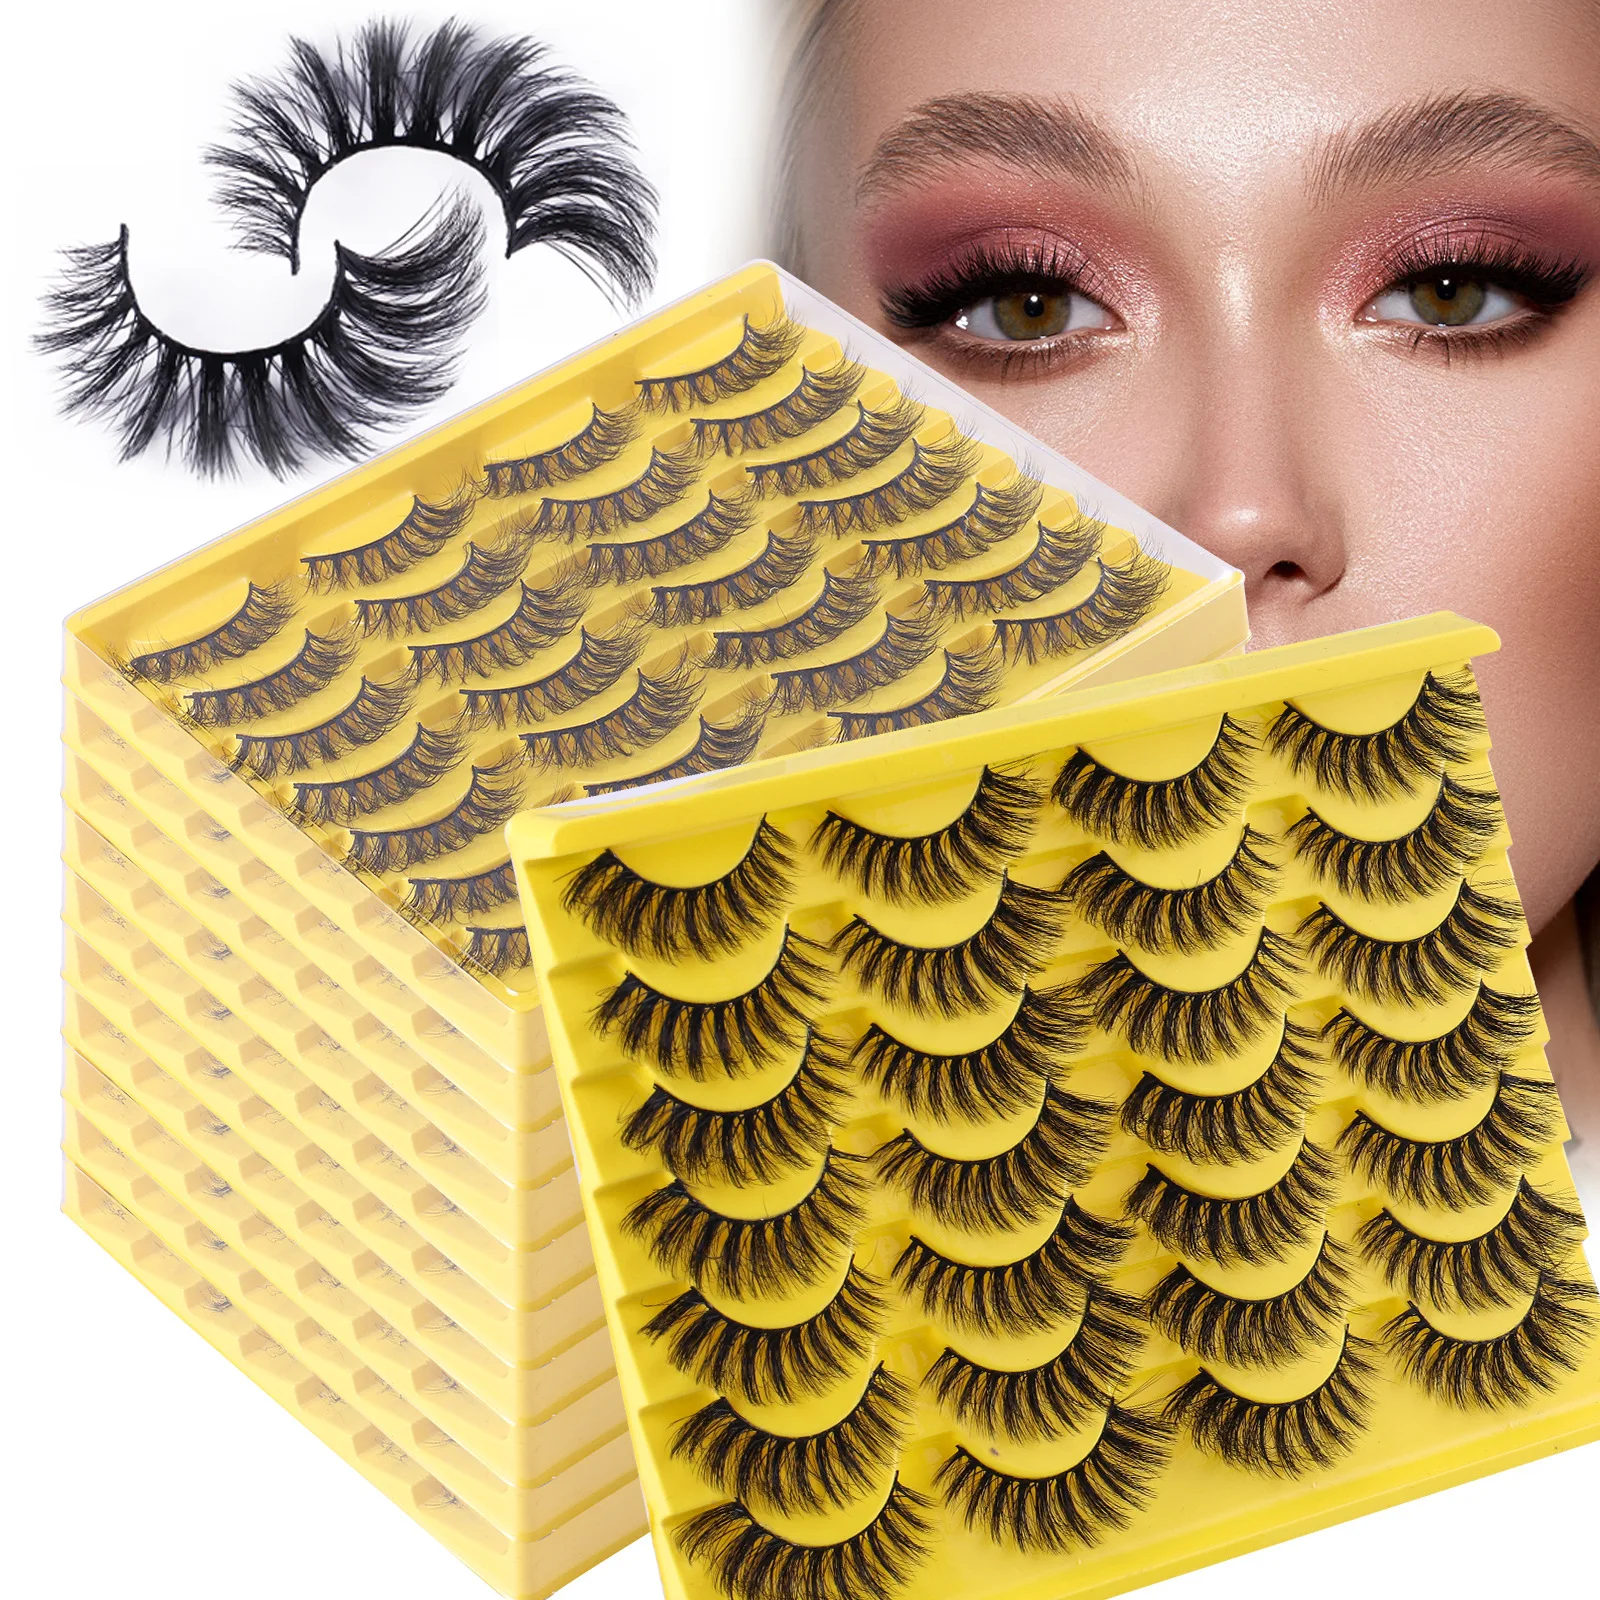 

14 Pairs 8D mink lashes extension supplies faux cils korean makeup soft fluffy thick curling cosplay manga long false eyelashes